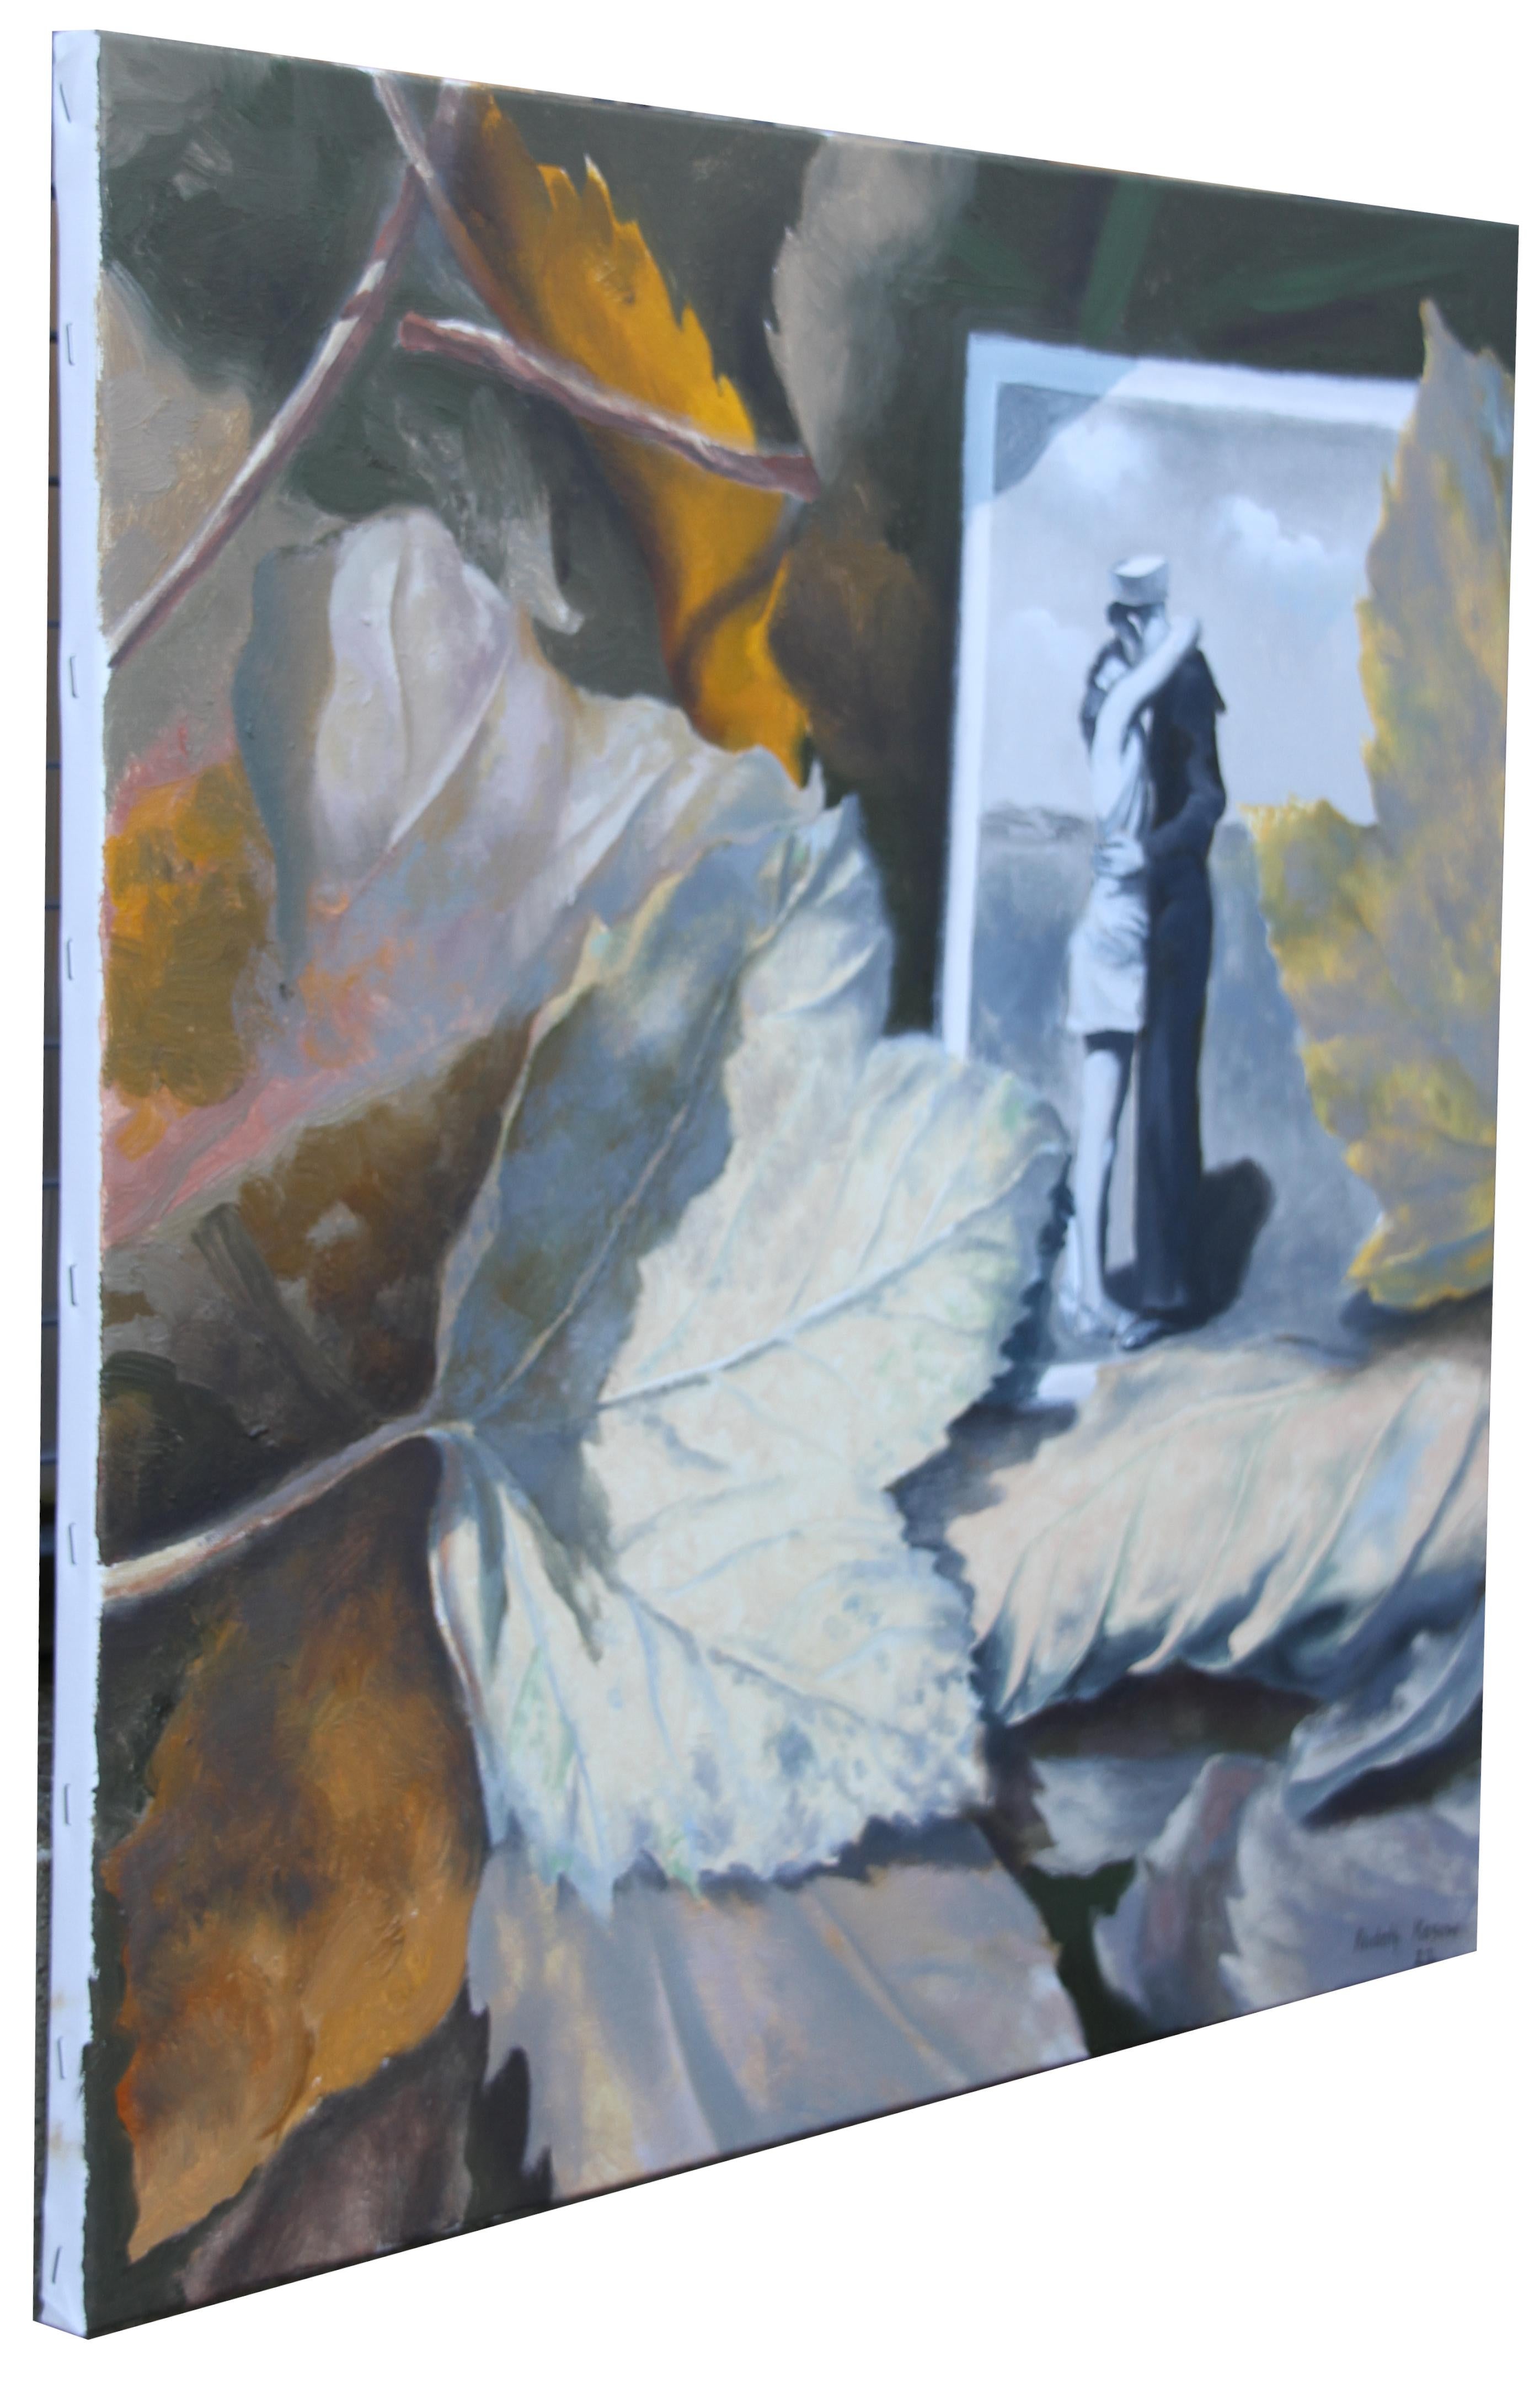 LOVERS AND AUTUMN LEAVES is a superbe original painting on canvas depicting a still life of a fall leaves next to a vintage black and white photograph of a couple in a loving embrace.

keywords; Earth tones, fall leaf, black and white photograph,